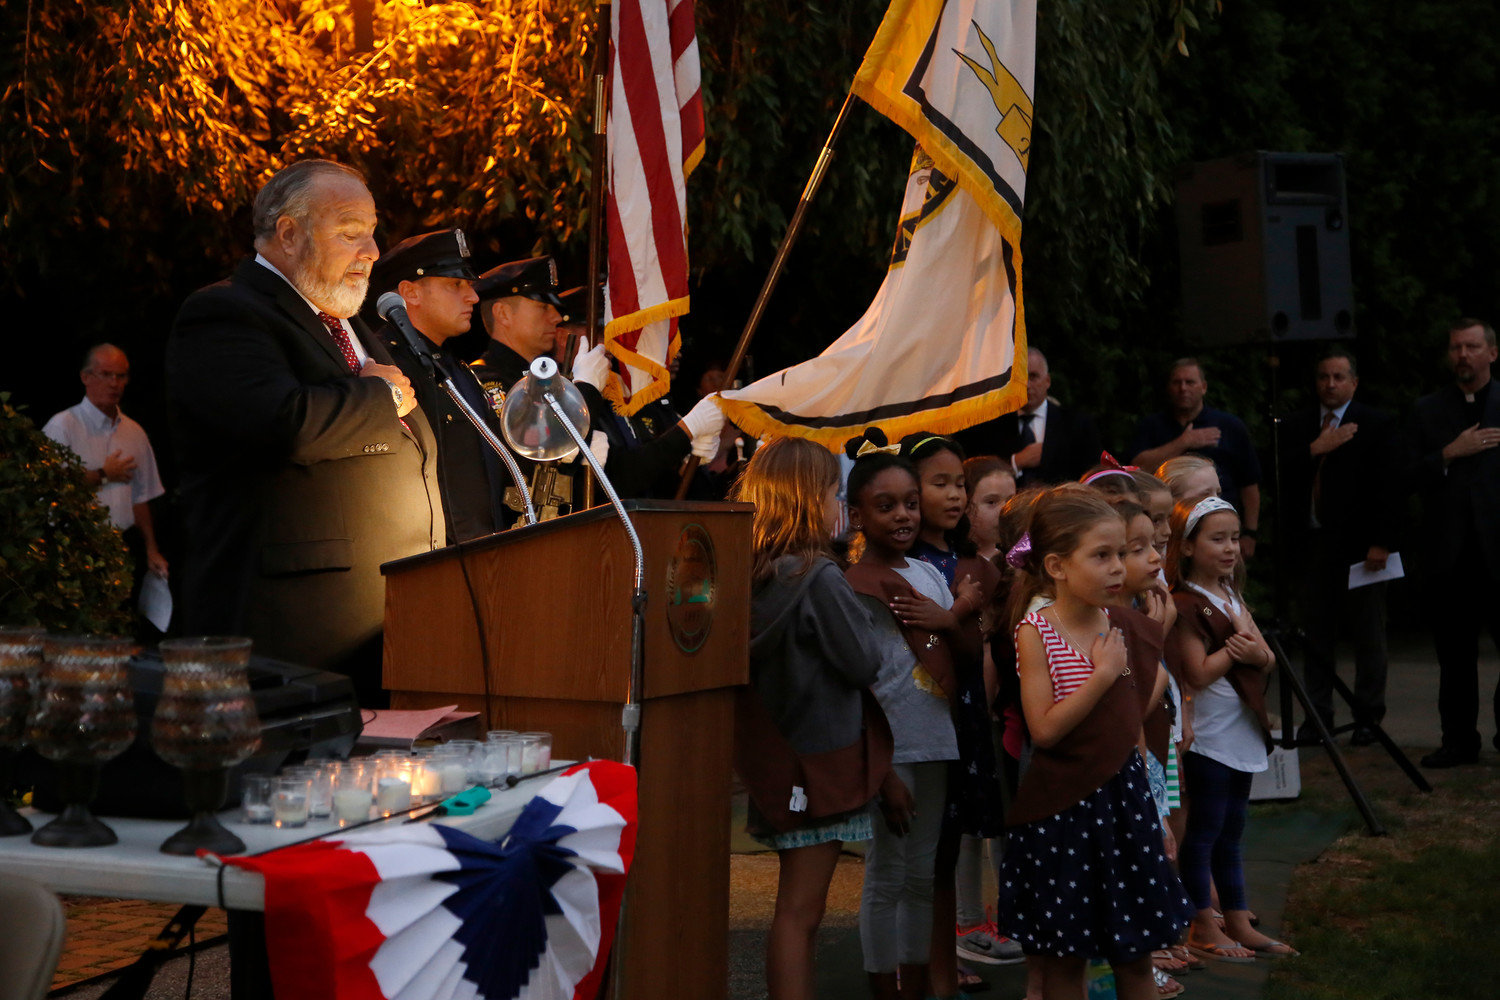 Mayor Francis Murray and local Girl Scouts led the Pledge of Allegiance before the 9/11 ceremony in 2017.